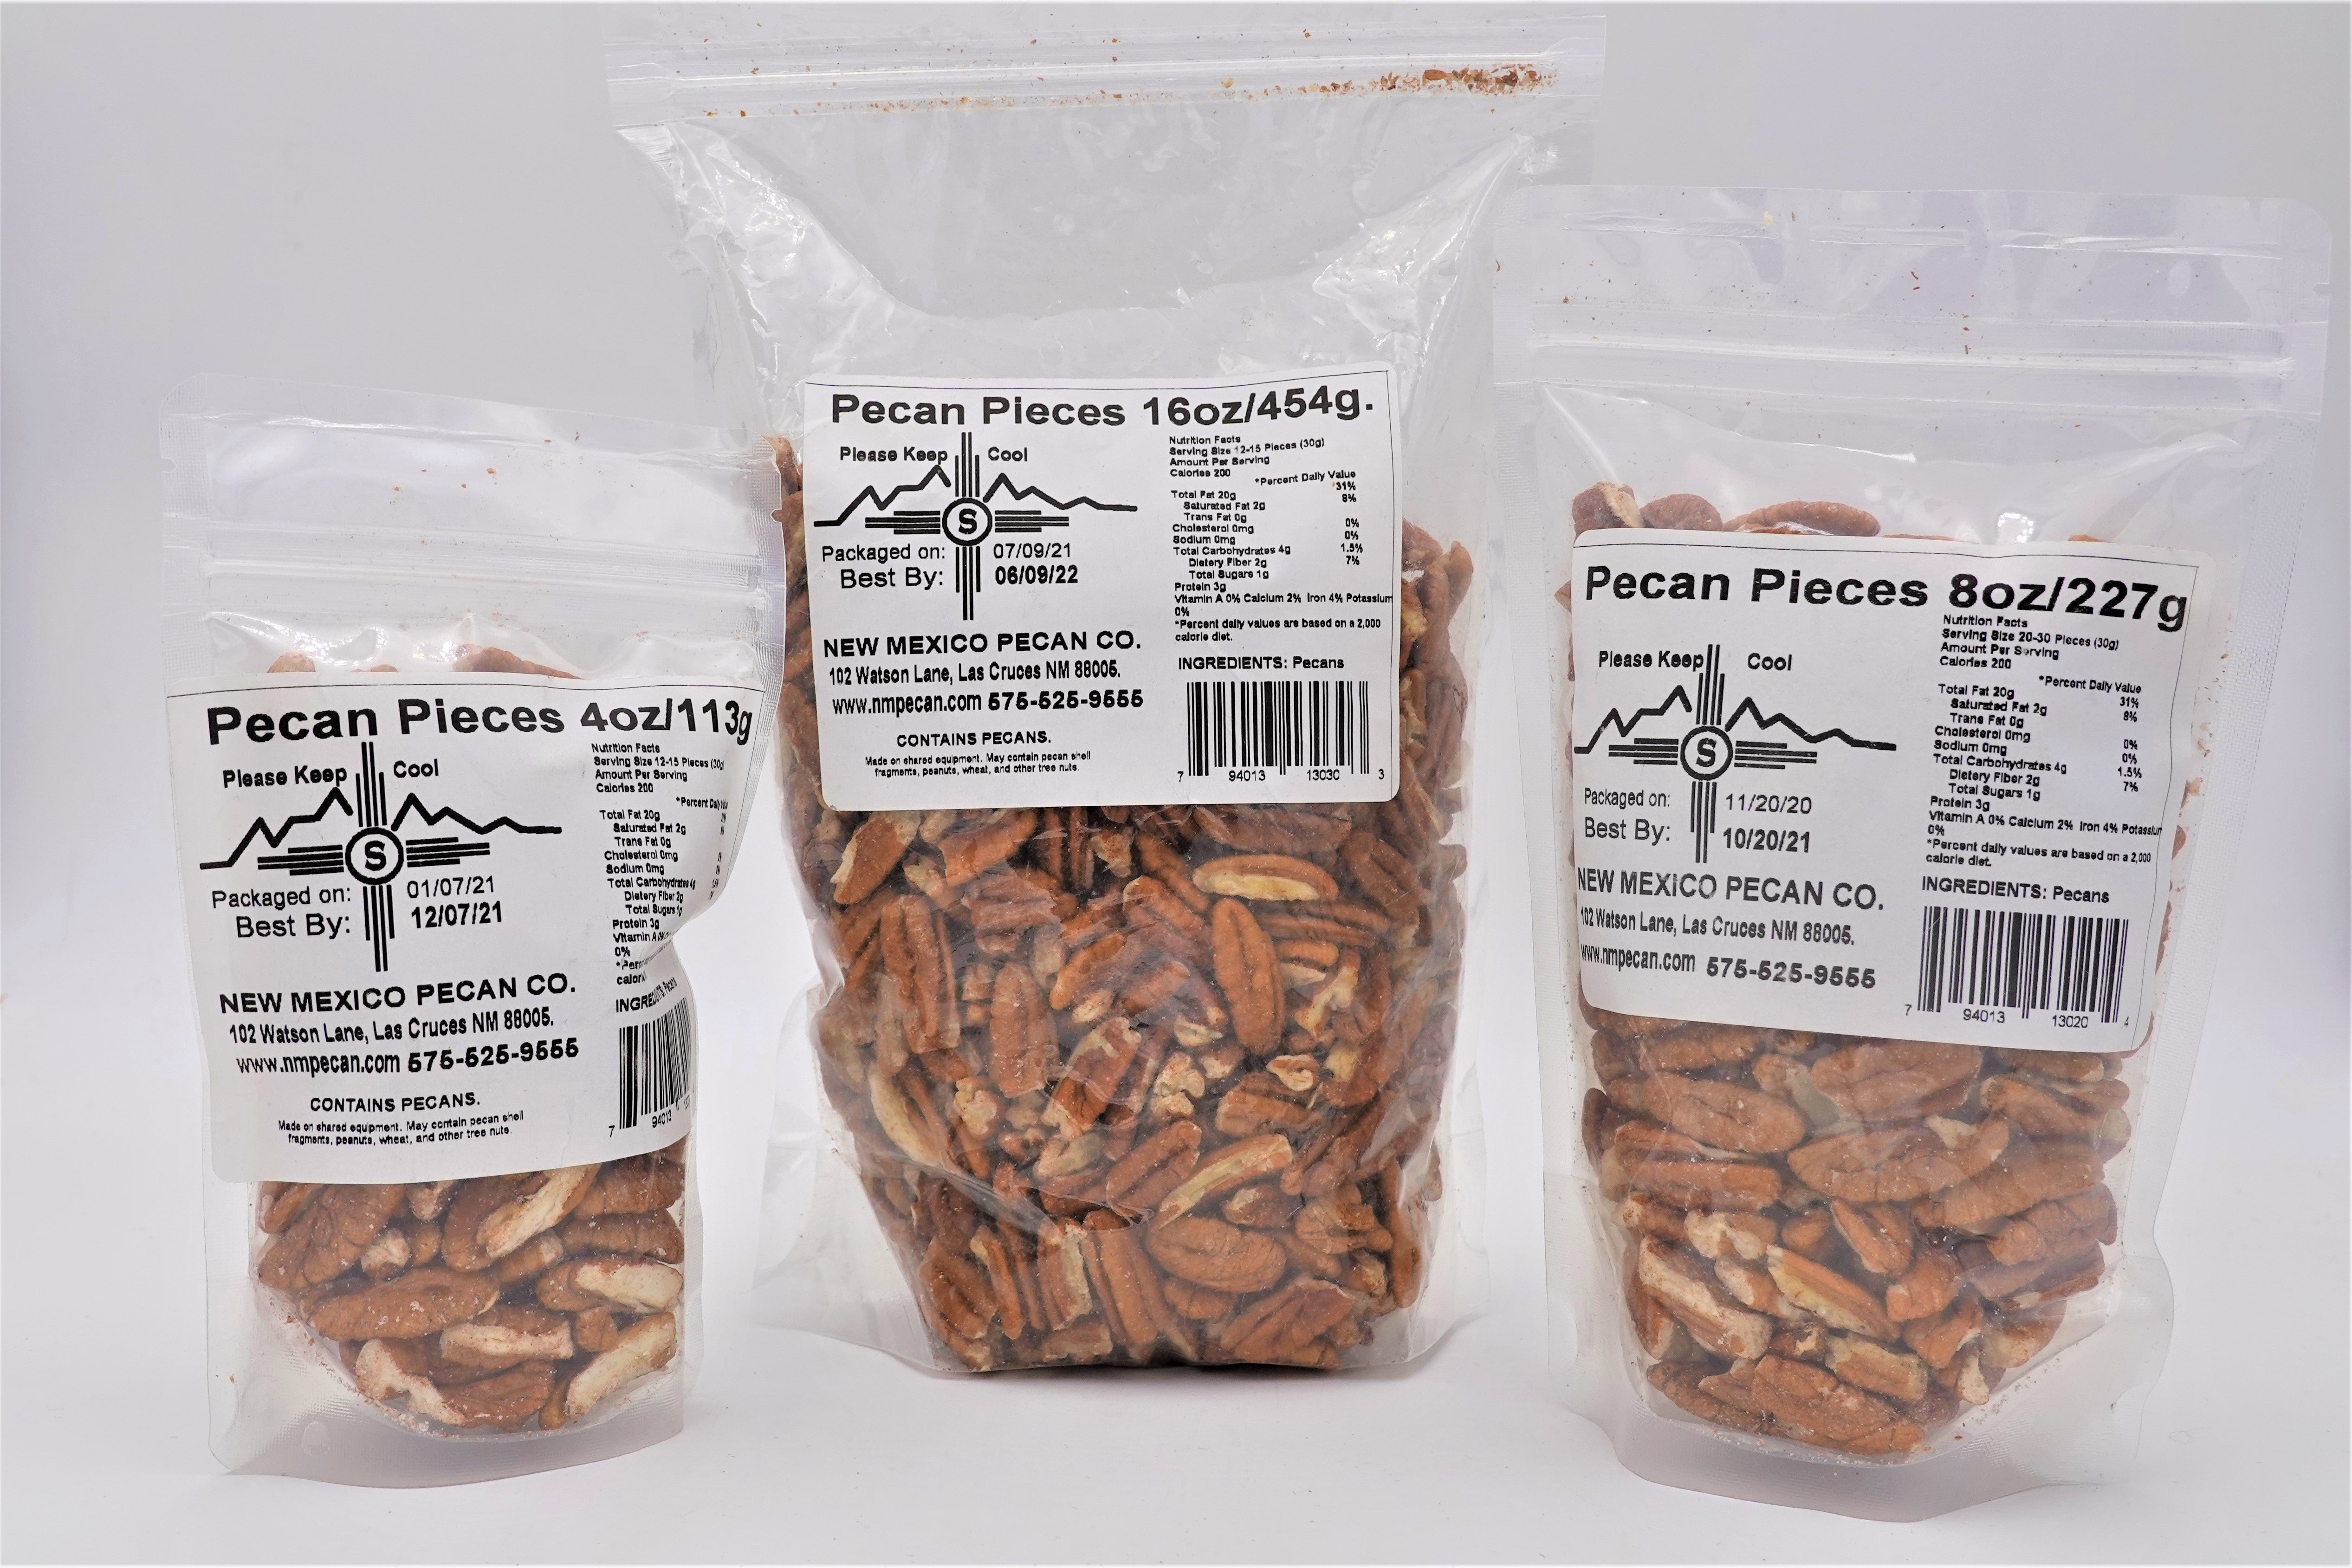 Three bags of Pecan Pieces, ideal as healthy snacks and stocking-stuffers, of different sizes with labels showing product details and barcodes, displayed against a white background.